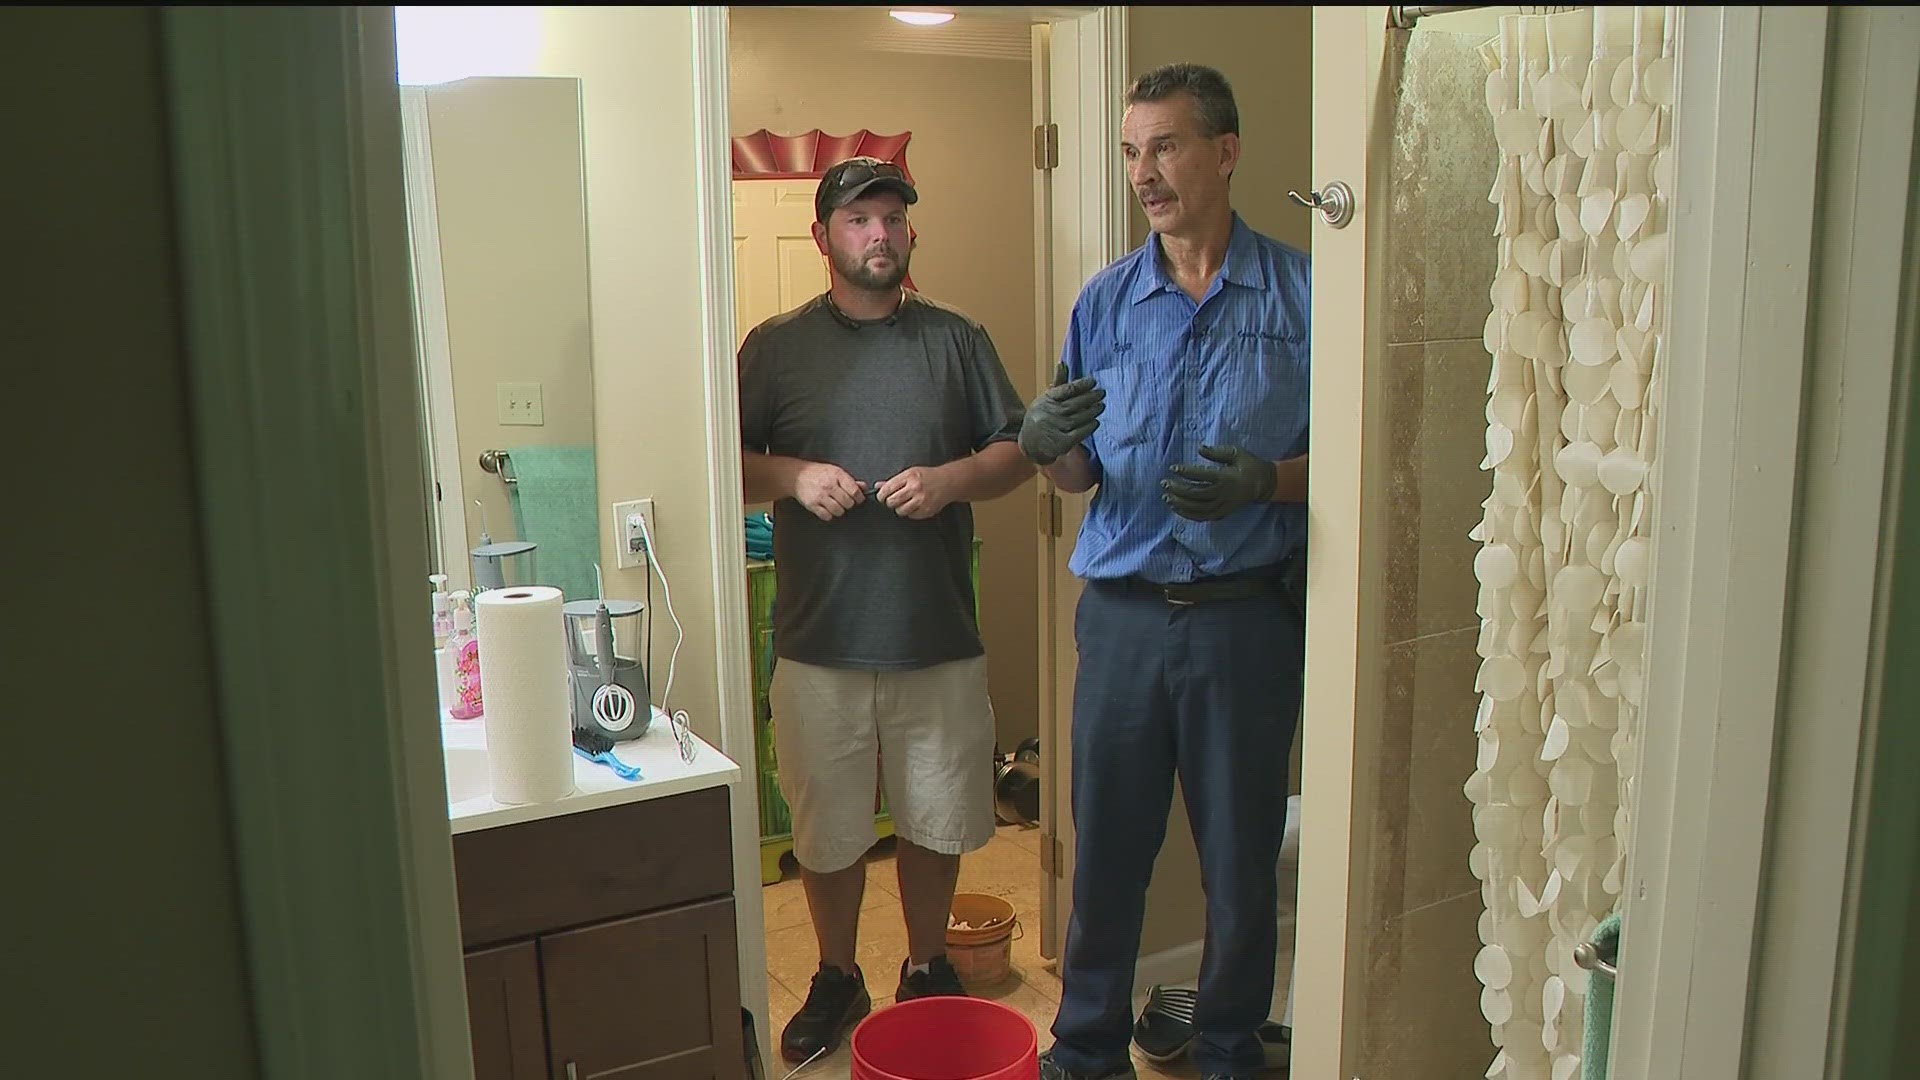 Master Plumber Scott Carter was out on the job with his co-worker Ryan Frazier when his heart stopped.